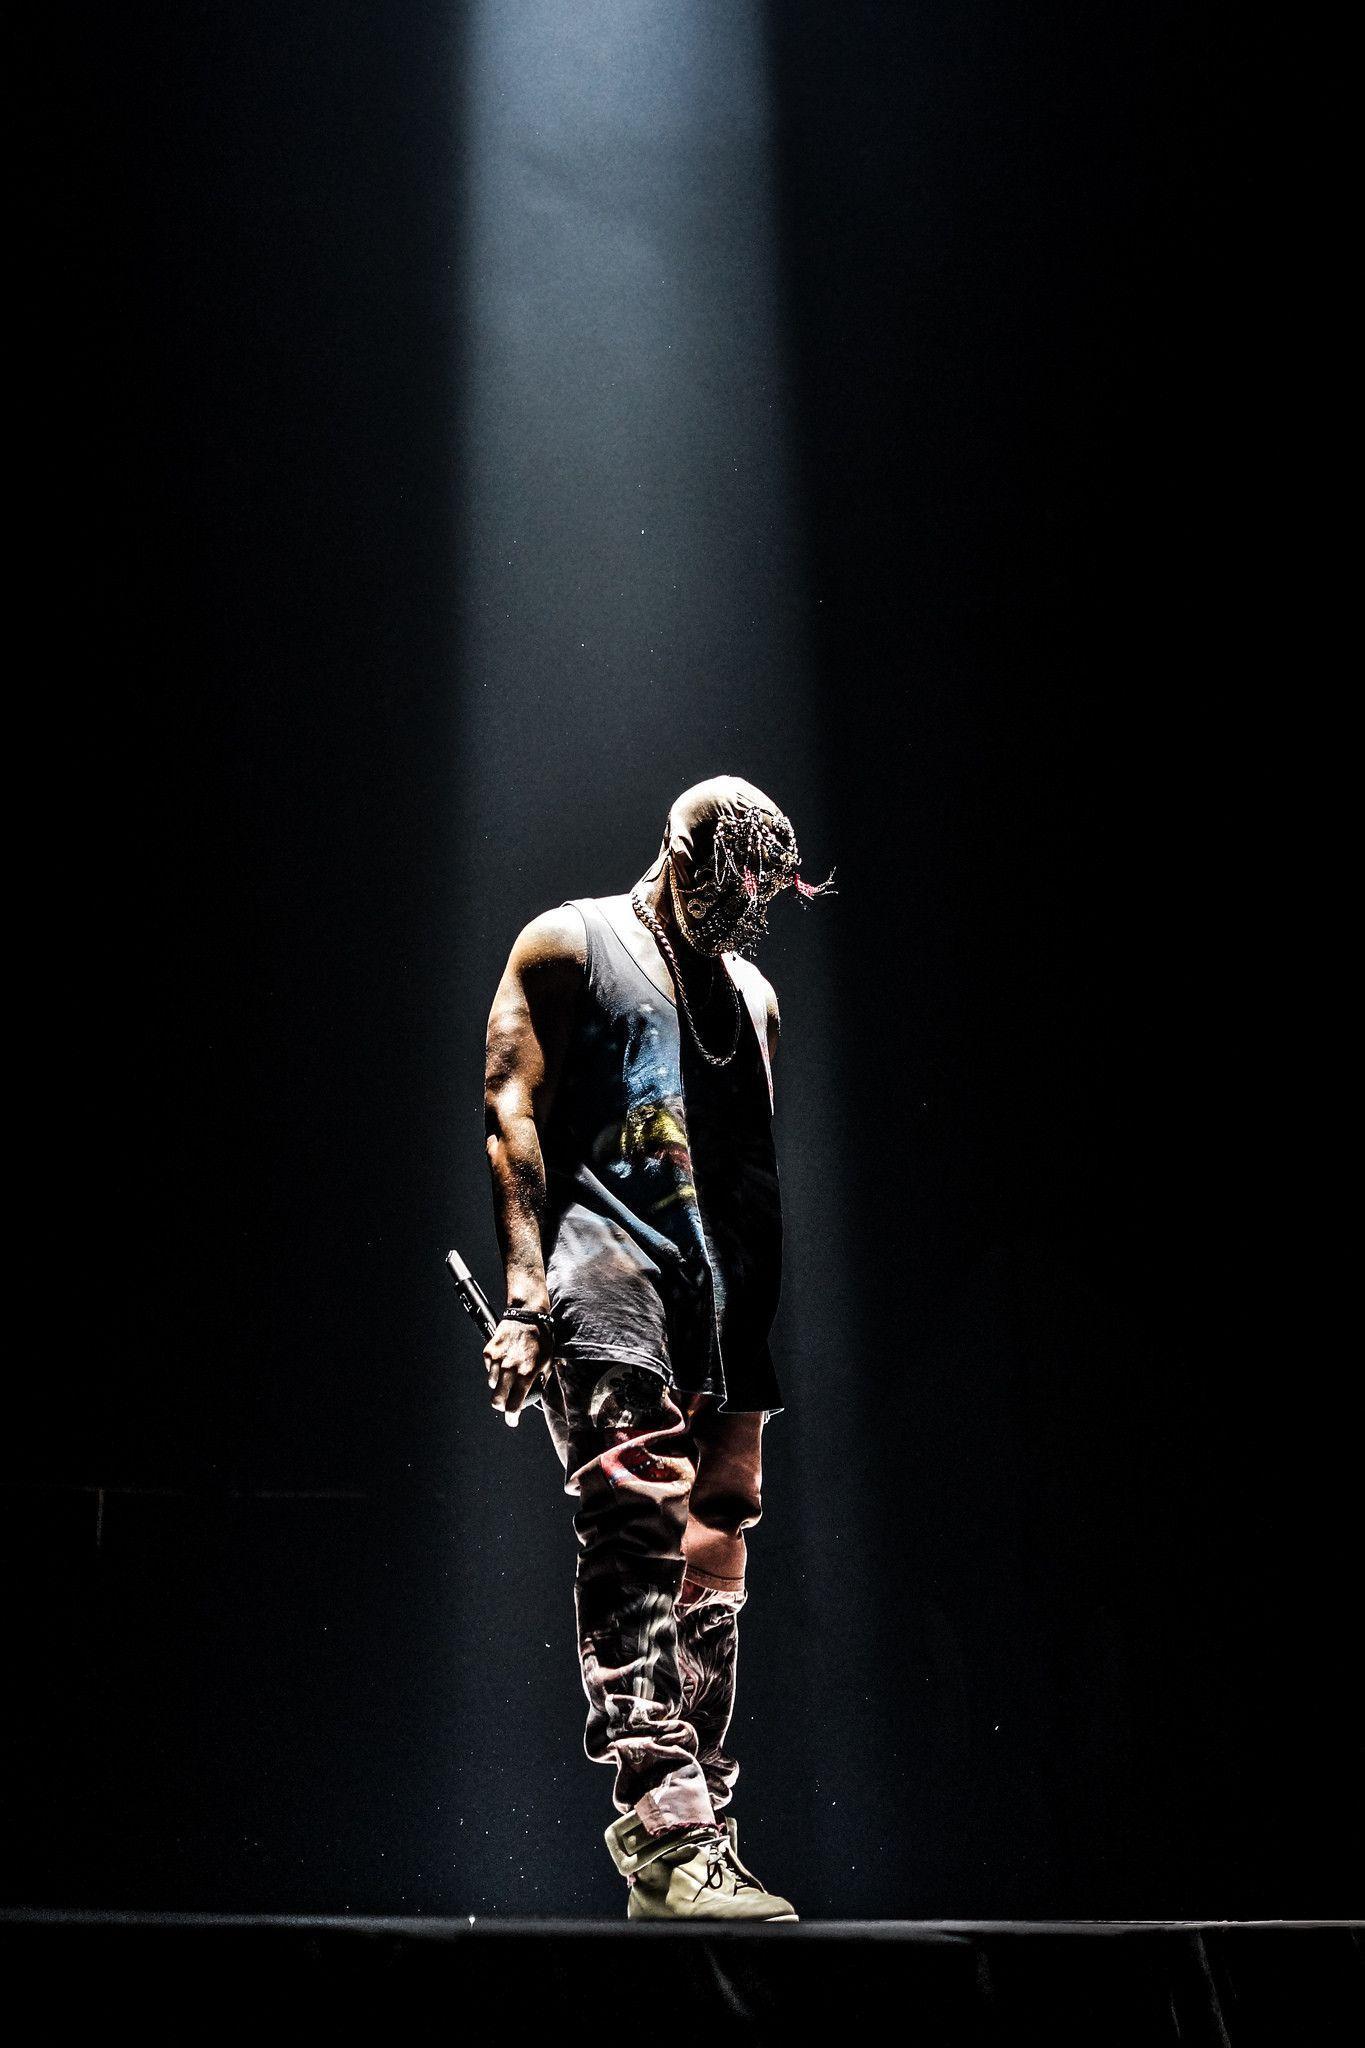 Kanye West Wallpapers - Wallpaper Cave